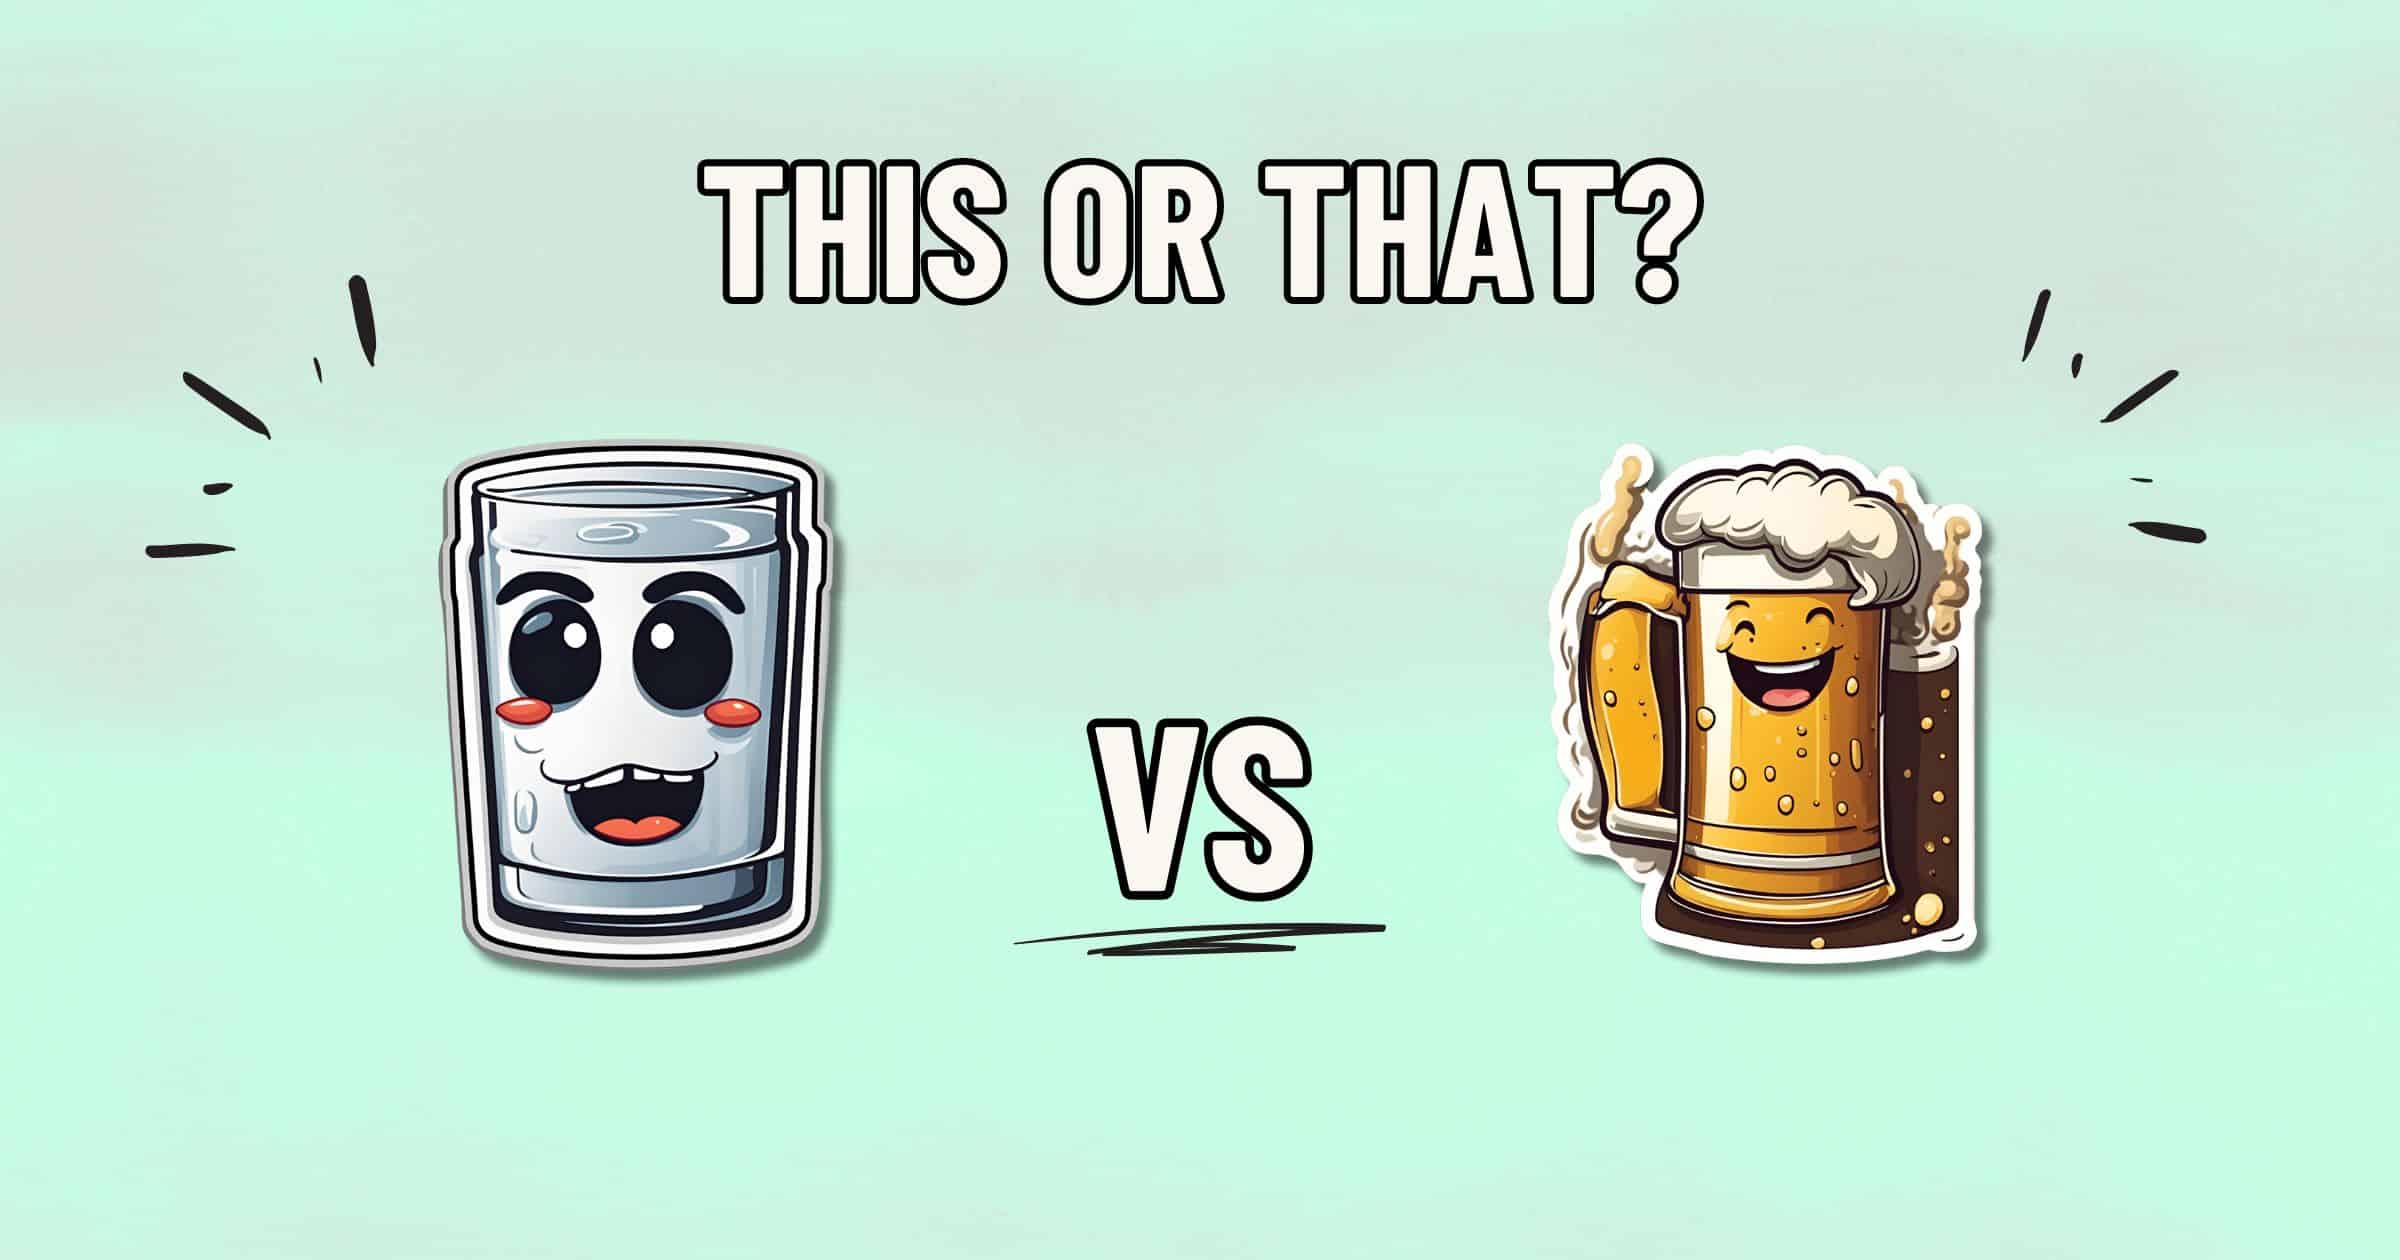 A cartoon-style image with the text "THIS OR THAT?" at the top. Below, an animated glass of water with a smiling face is on the left, and an animated mug of beer with a frothy top and a smiling face is on the right. The word "VS" is in the center, reminiscent of an auto draft showdown.